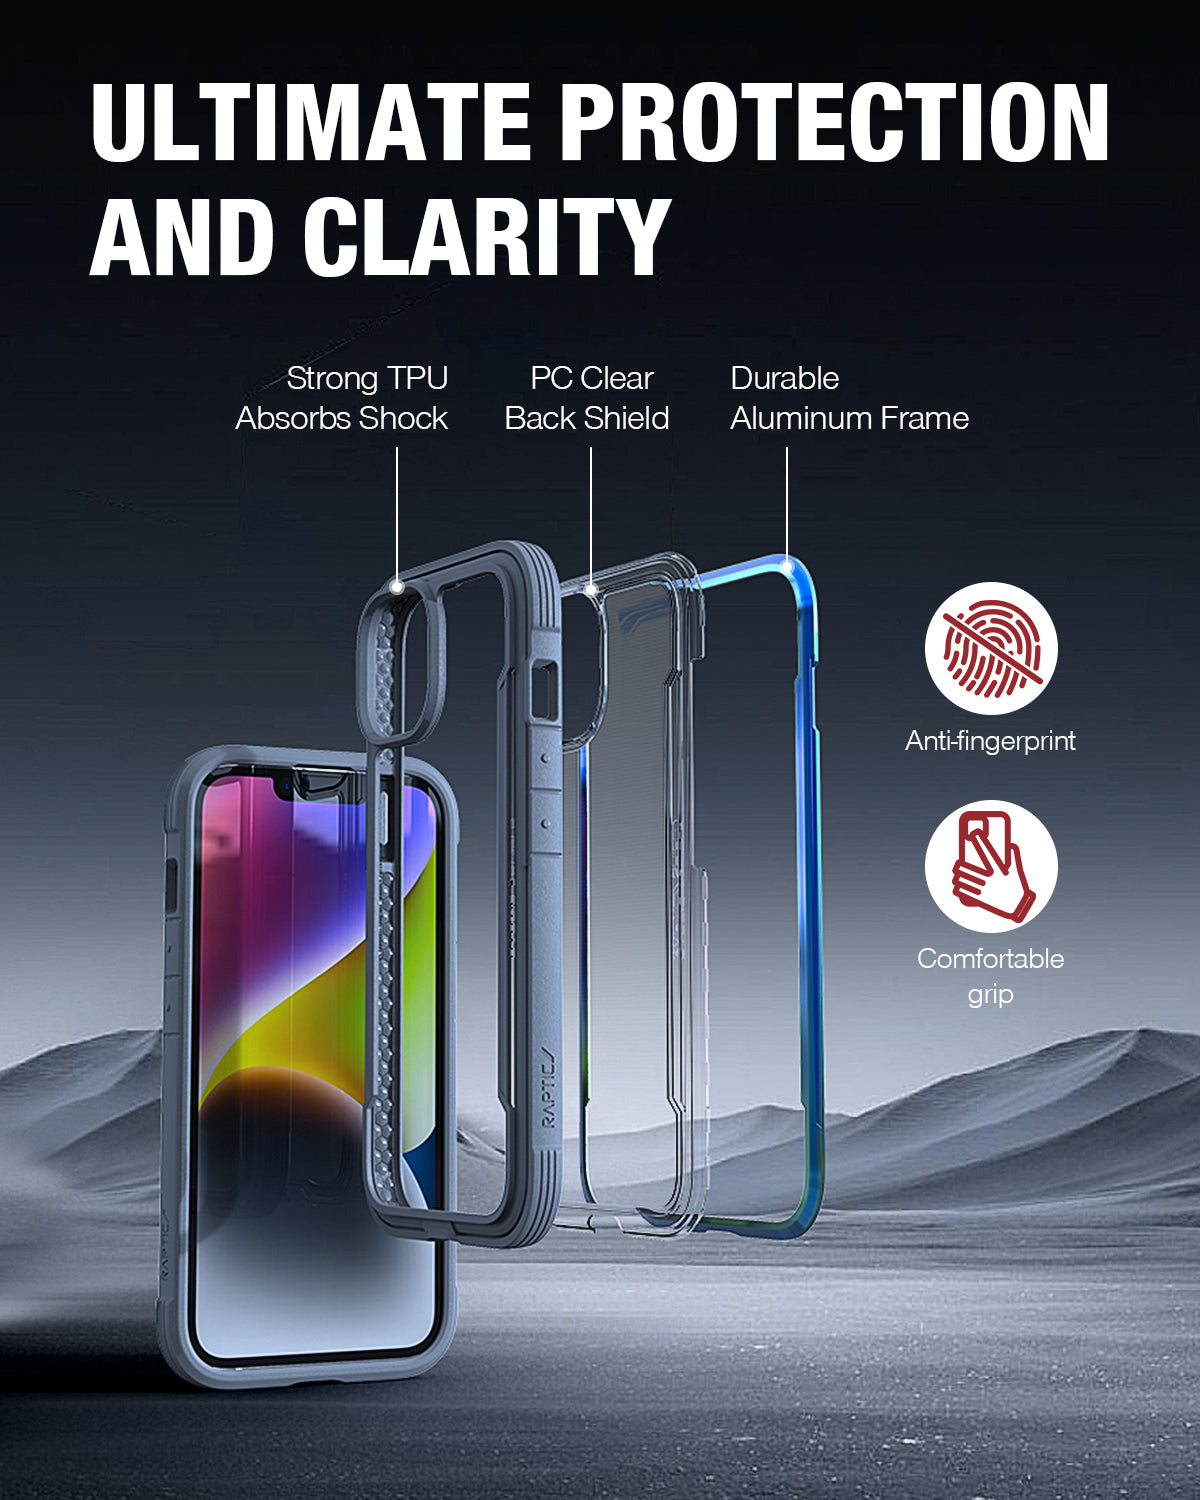 The ultimate protection and clarity case for the iPhone 11, offering tough Raptic Shield case and wireless charging compatibility.